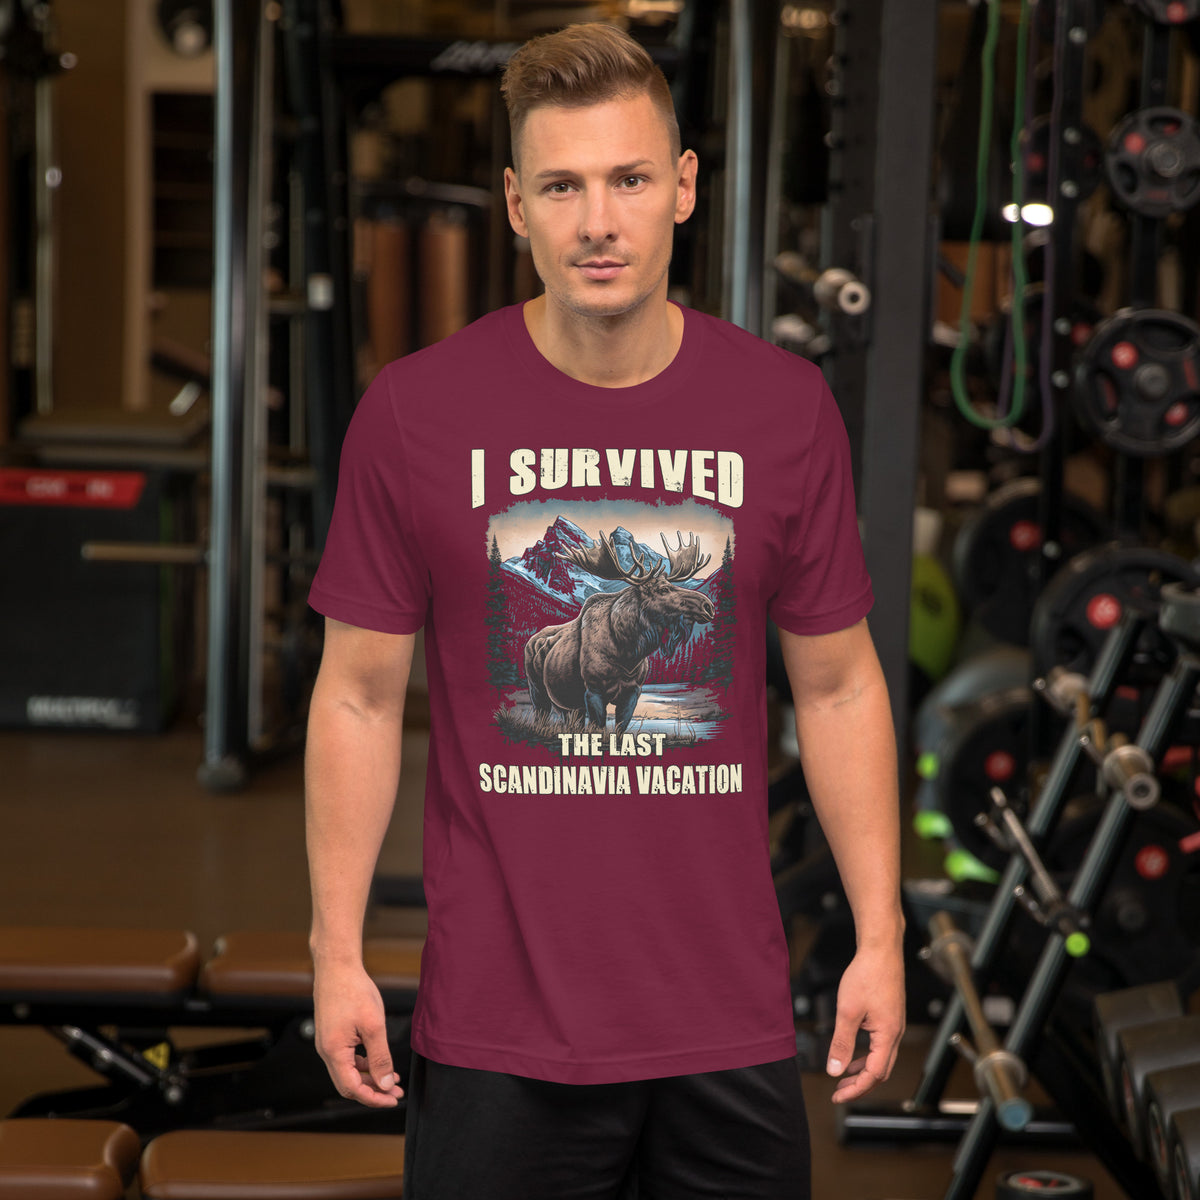 Cooles Herren Spruch Shirt "I Survived the Last Scandinavia vacation"